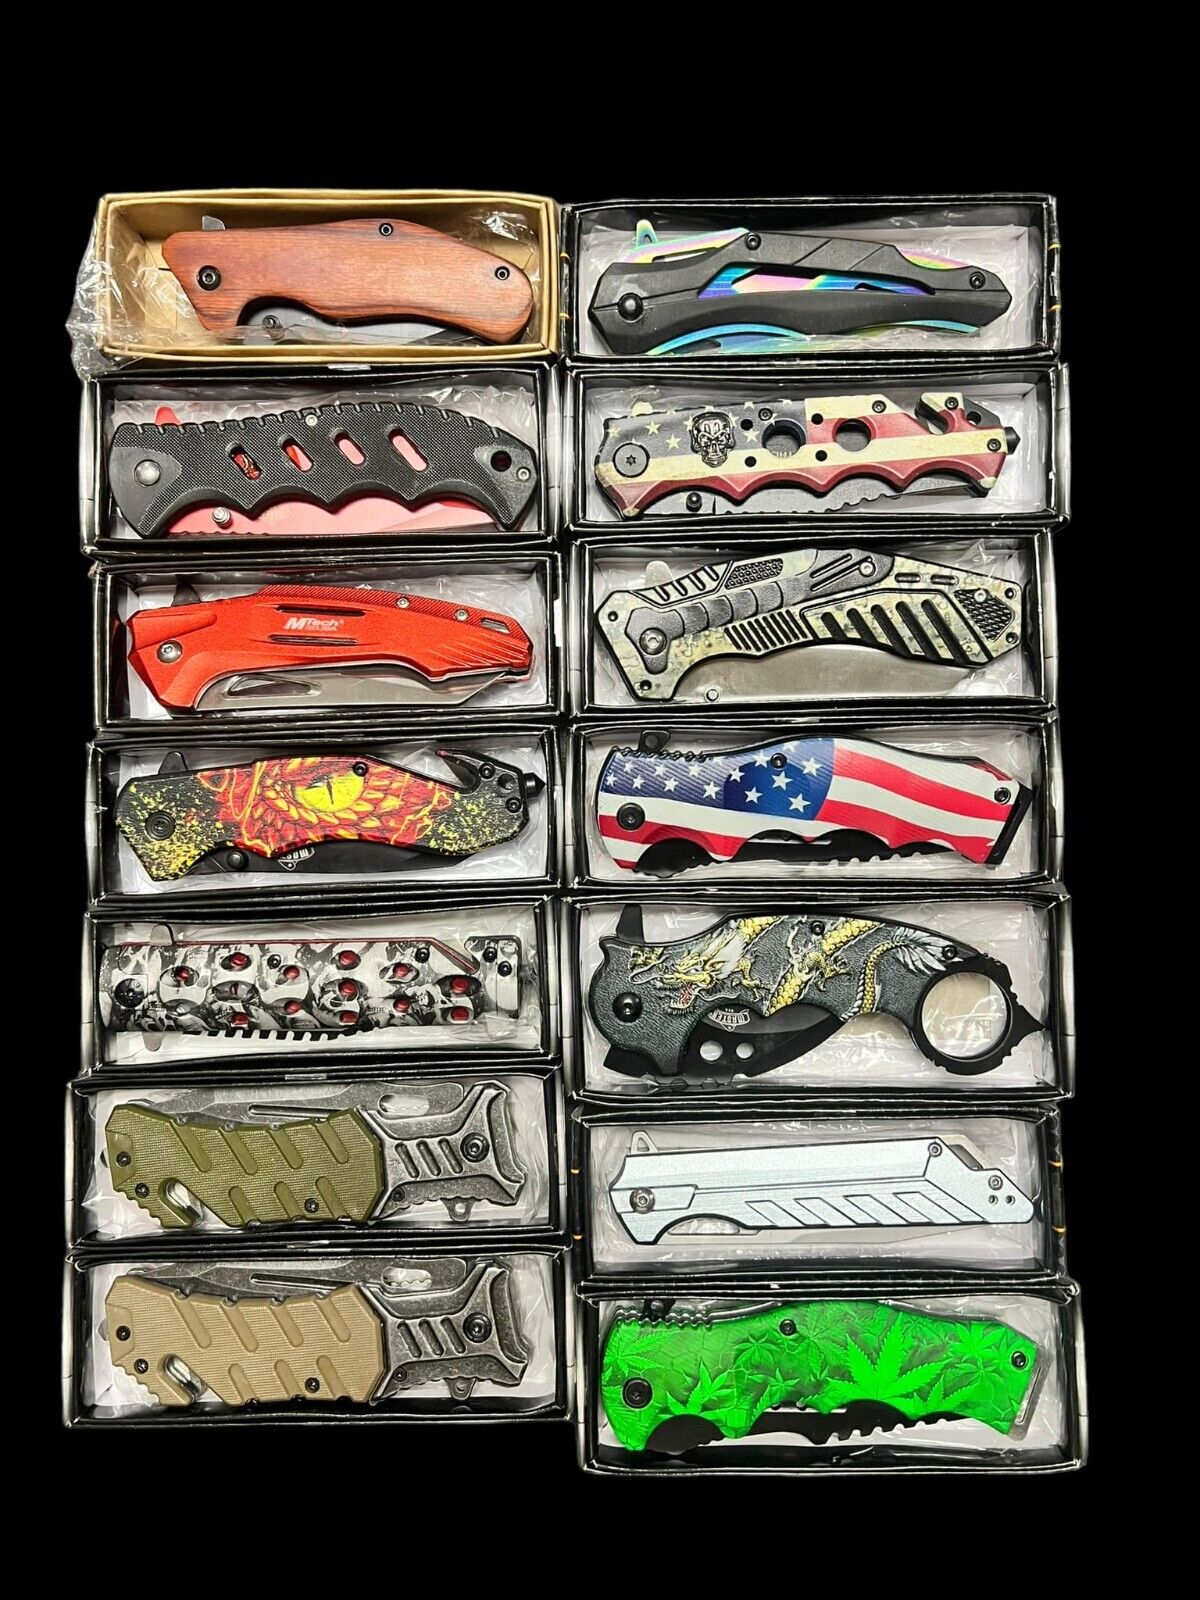 Wholesale Set of 14 Brand New Spring Assisted pocket Camping Outdoor knives